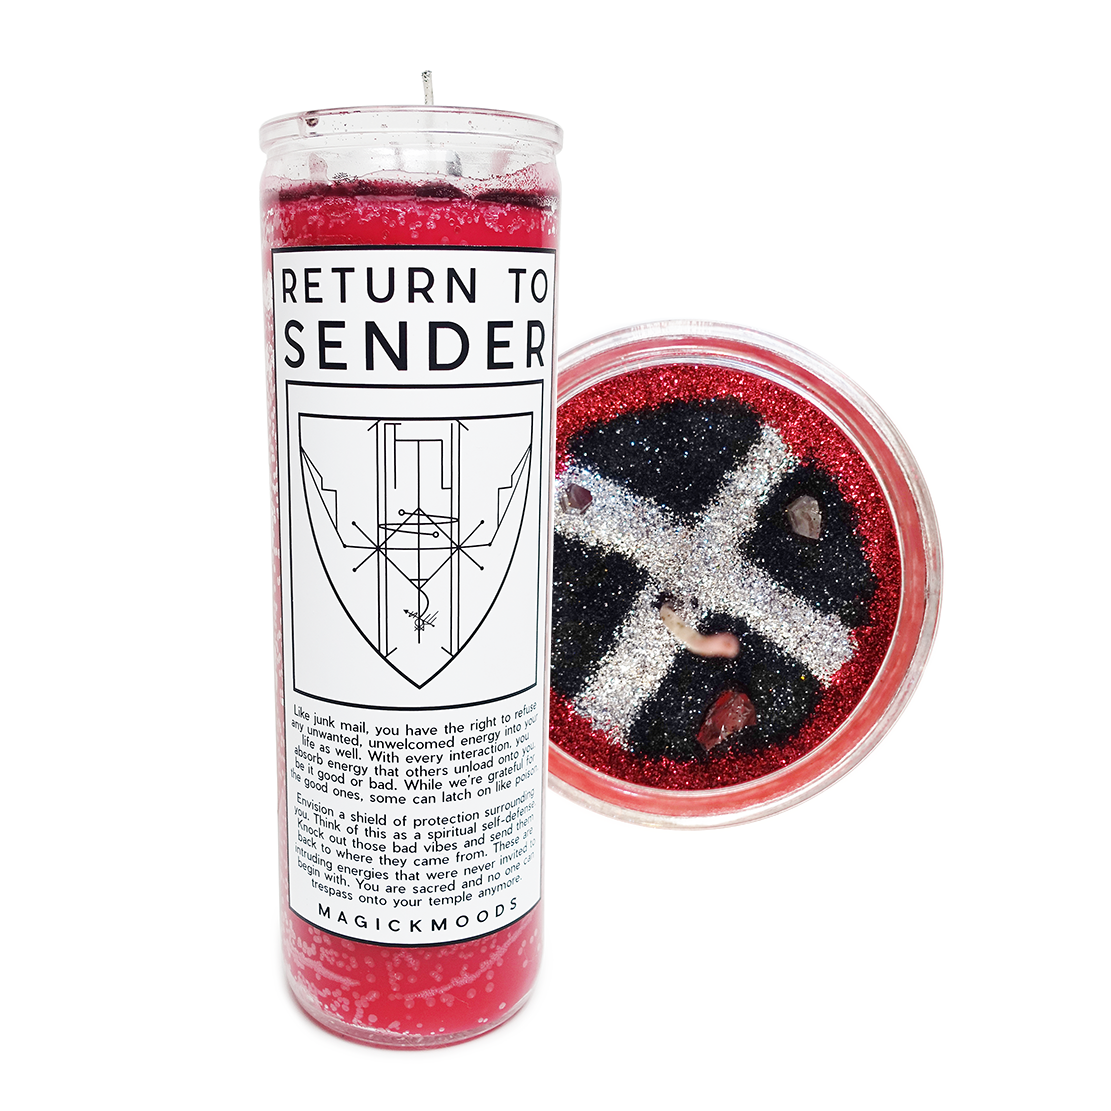 Return To Sender 7-Day Meditation Candle - PREORDER - Ships by July 28th, 2023